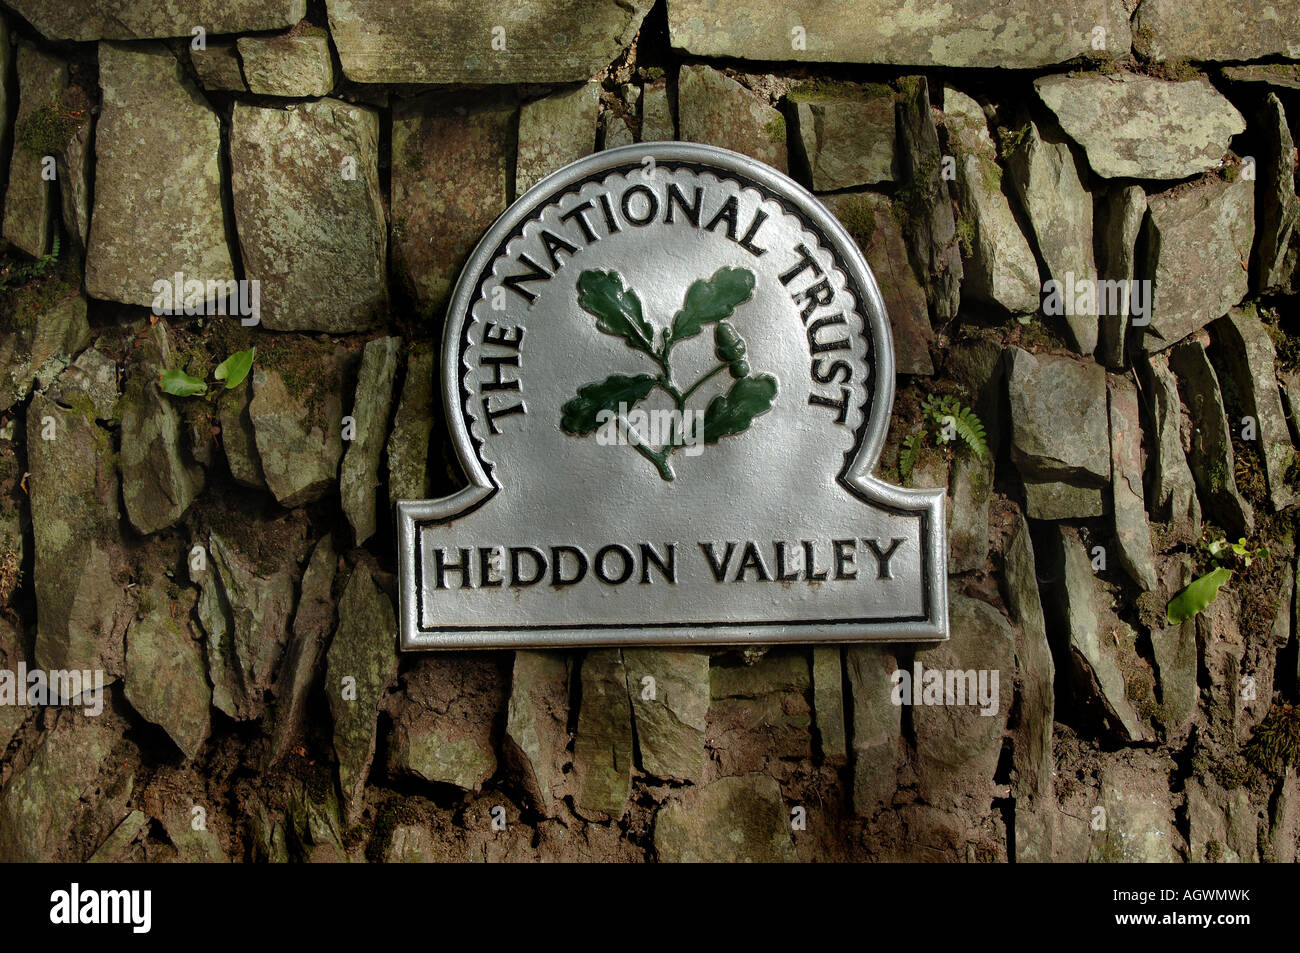 A National Trust Heddon Valley sign on a stone wall, Exmoor, Devon. Stock Photo